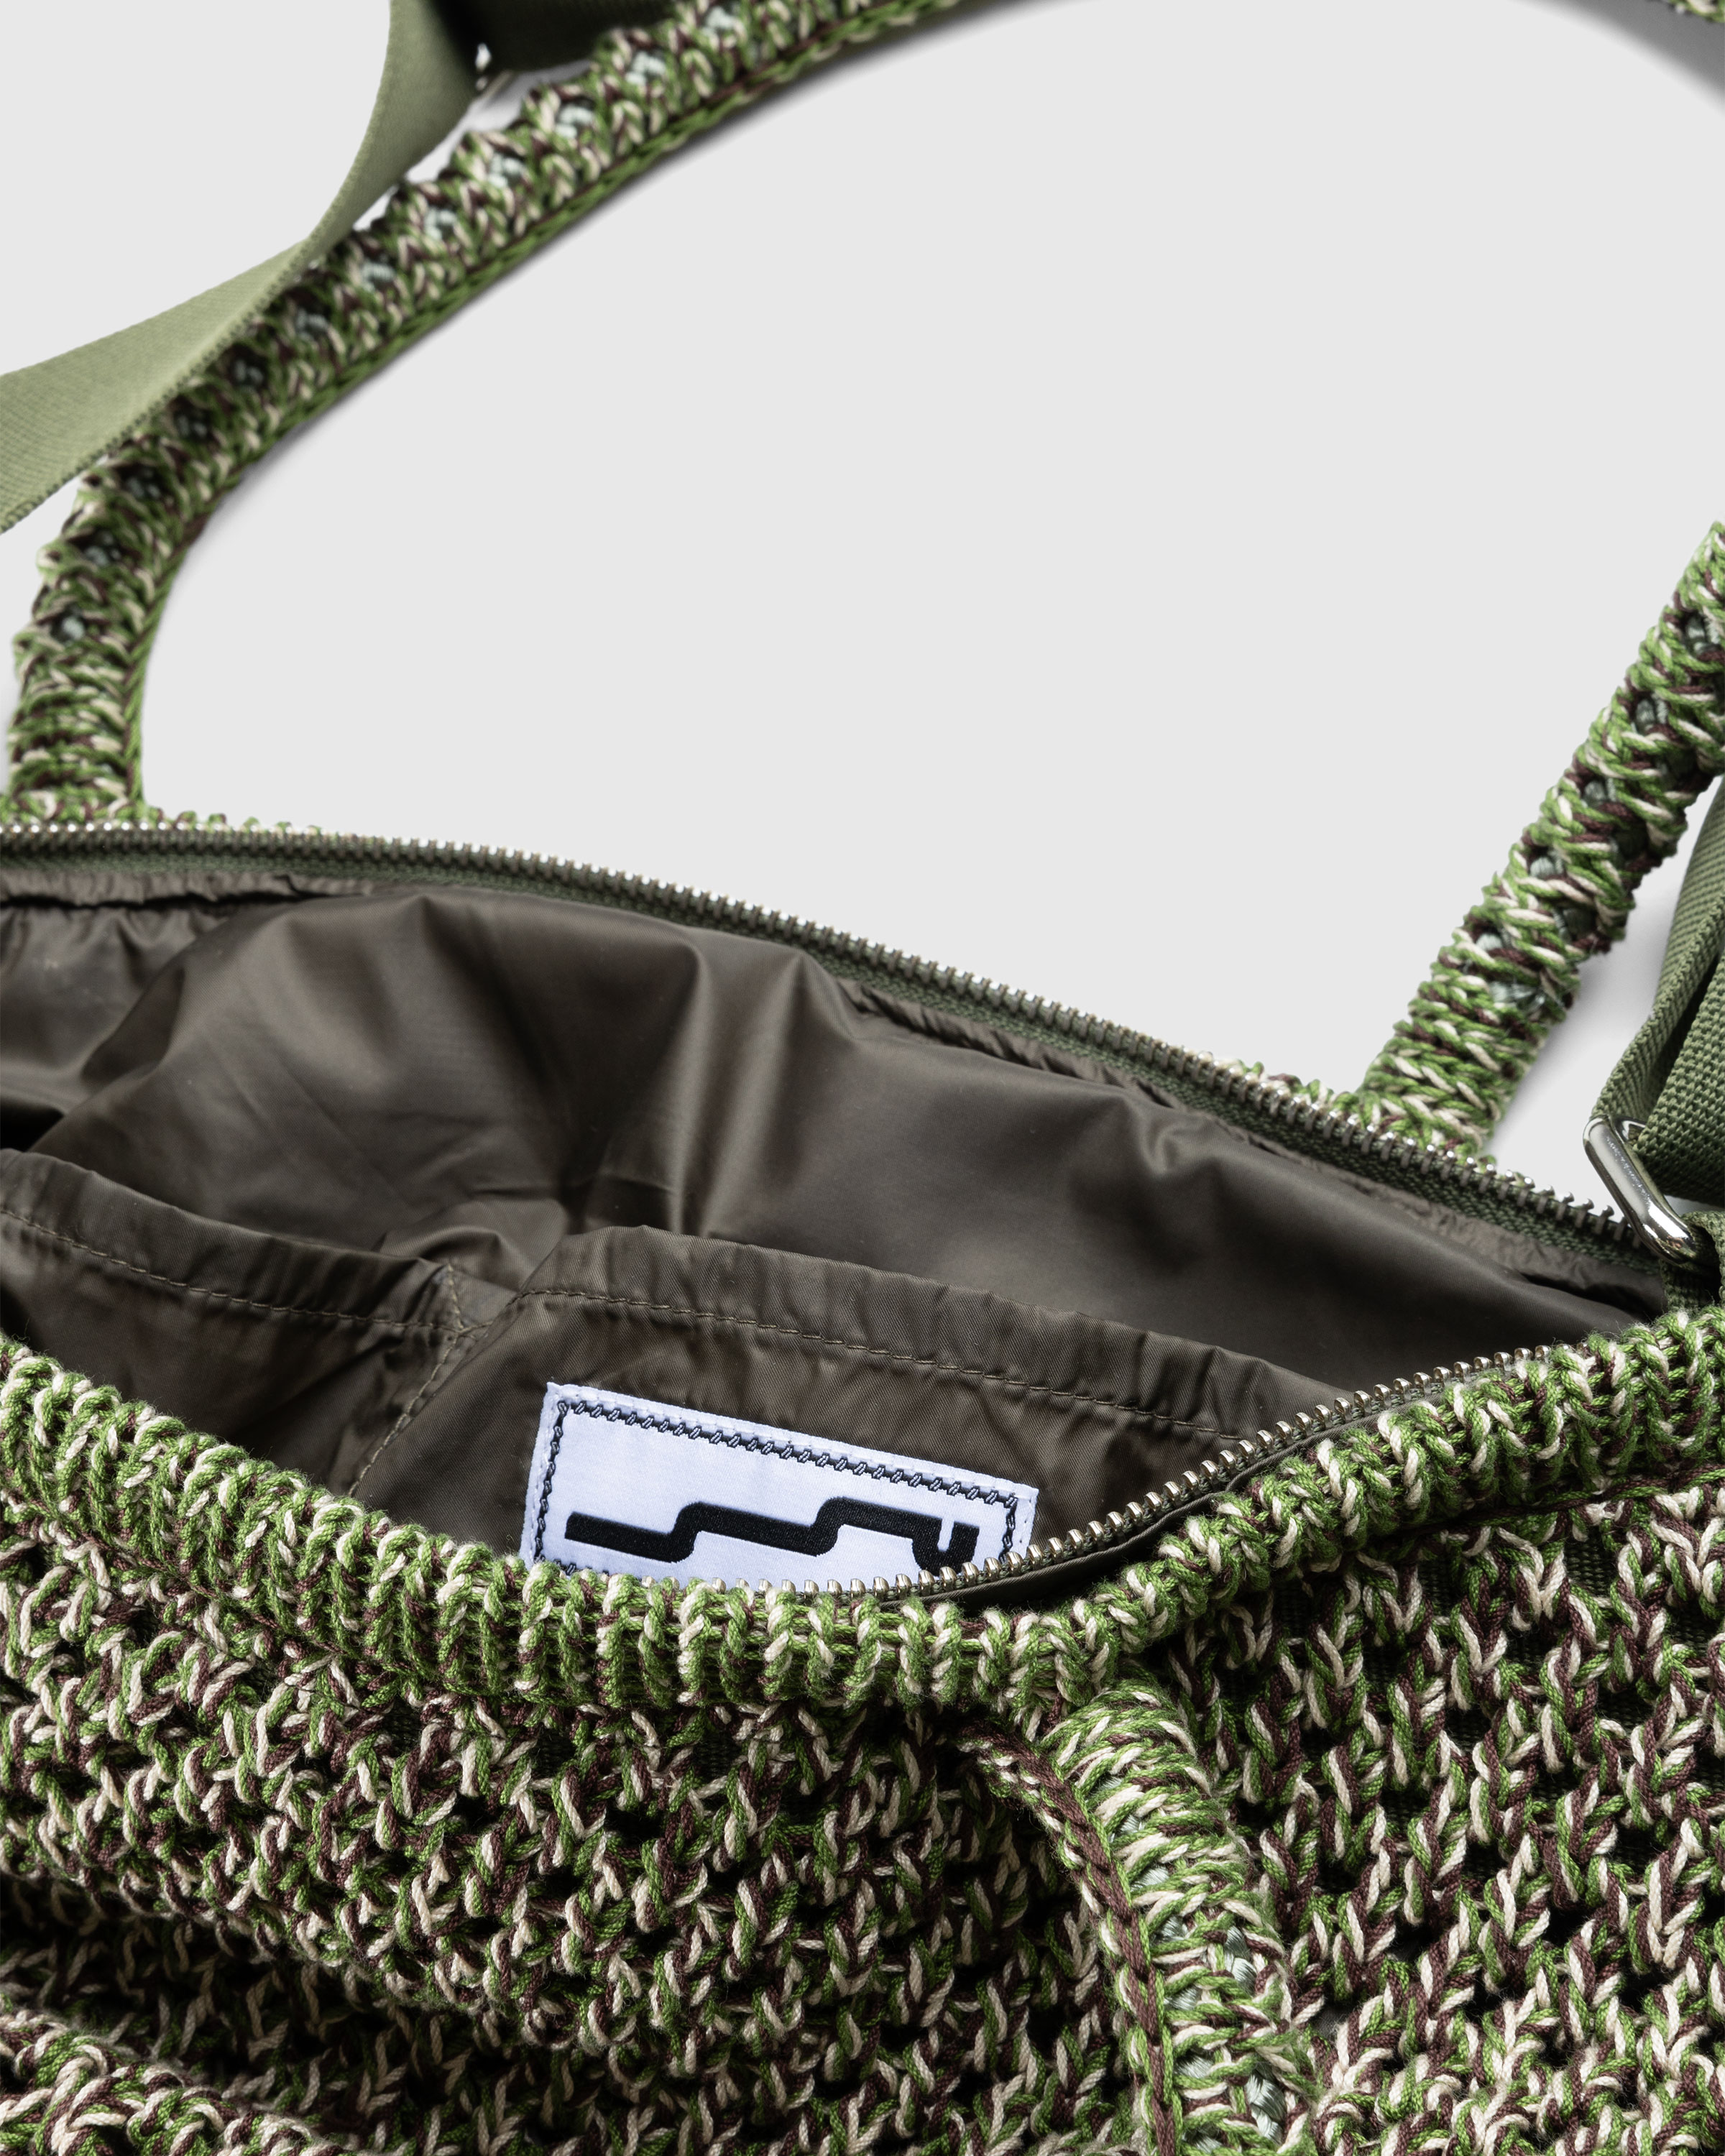 SSU – Knitted Mesh Work Tote Classic Camo - Tote Bags - Green - Image 3